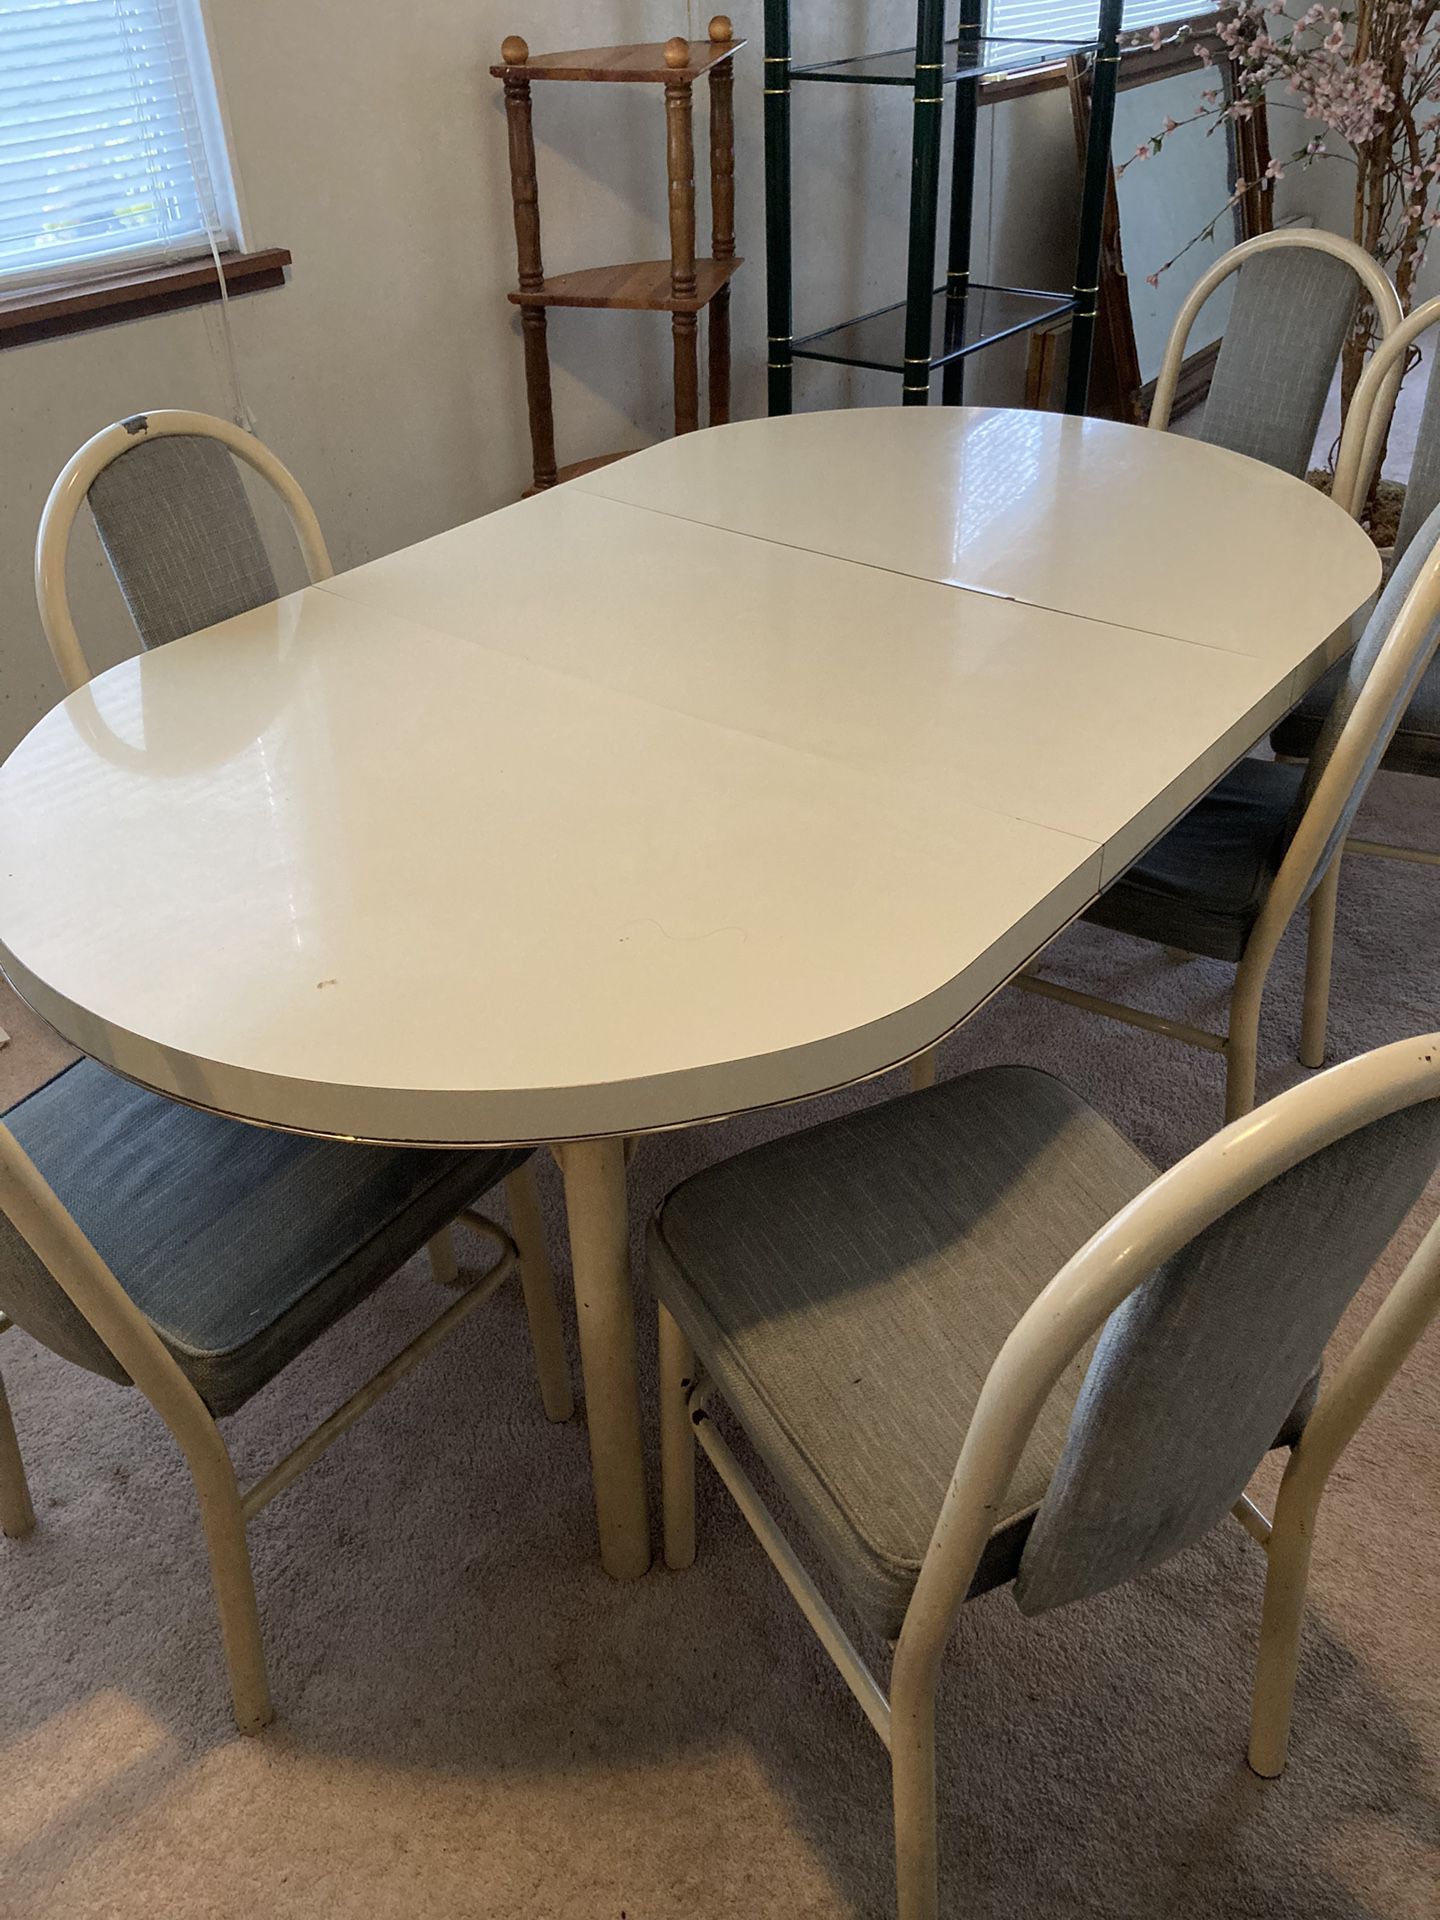 Free Dining Table Chairs And Couch